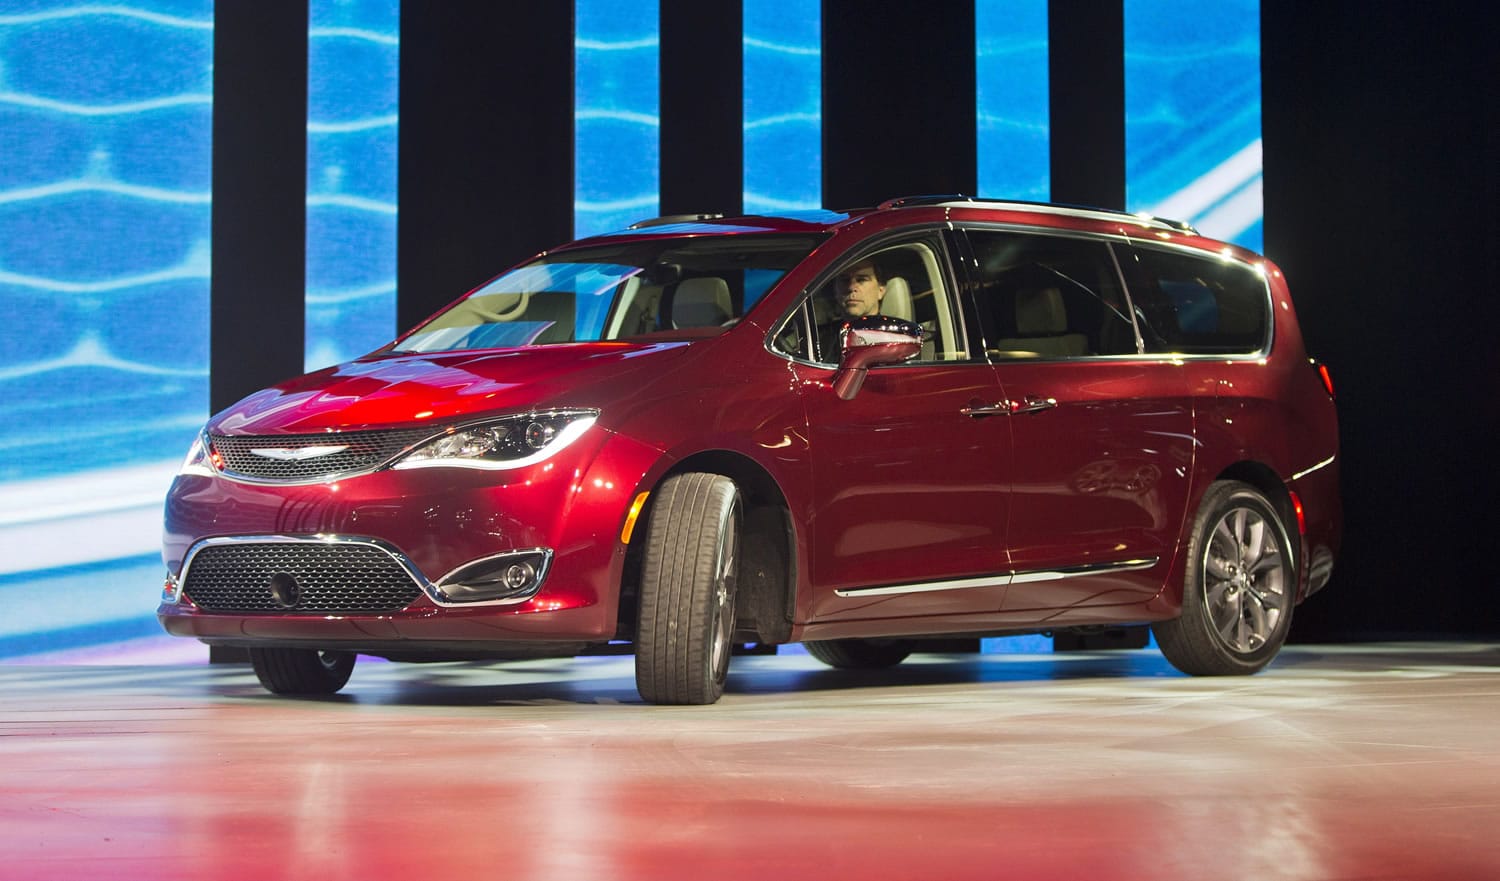 The 2017 Chrysler Pacifica is unveiled at the North American International Auto Show on Monday in Detroit, Mich.